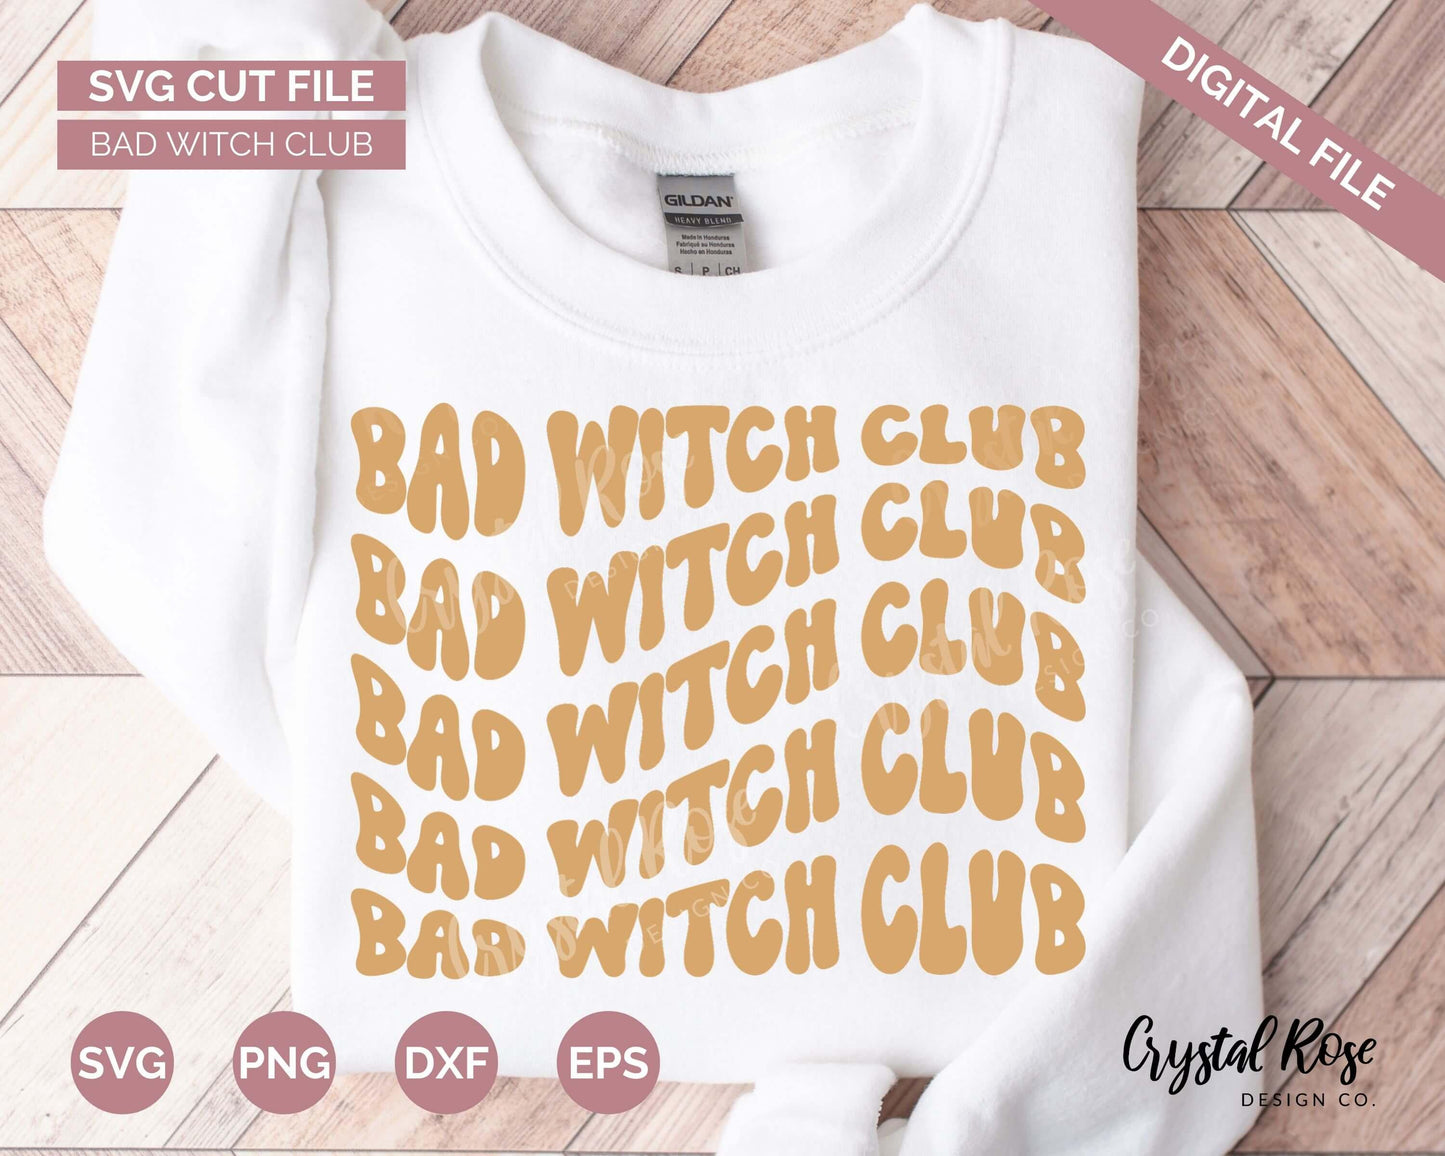 Bad Witch Club SVG, Halloween SVG, Digital Download, Cricut, Silhouette, Glowforge (includes svg/png/dxf/eps)